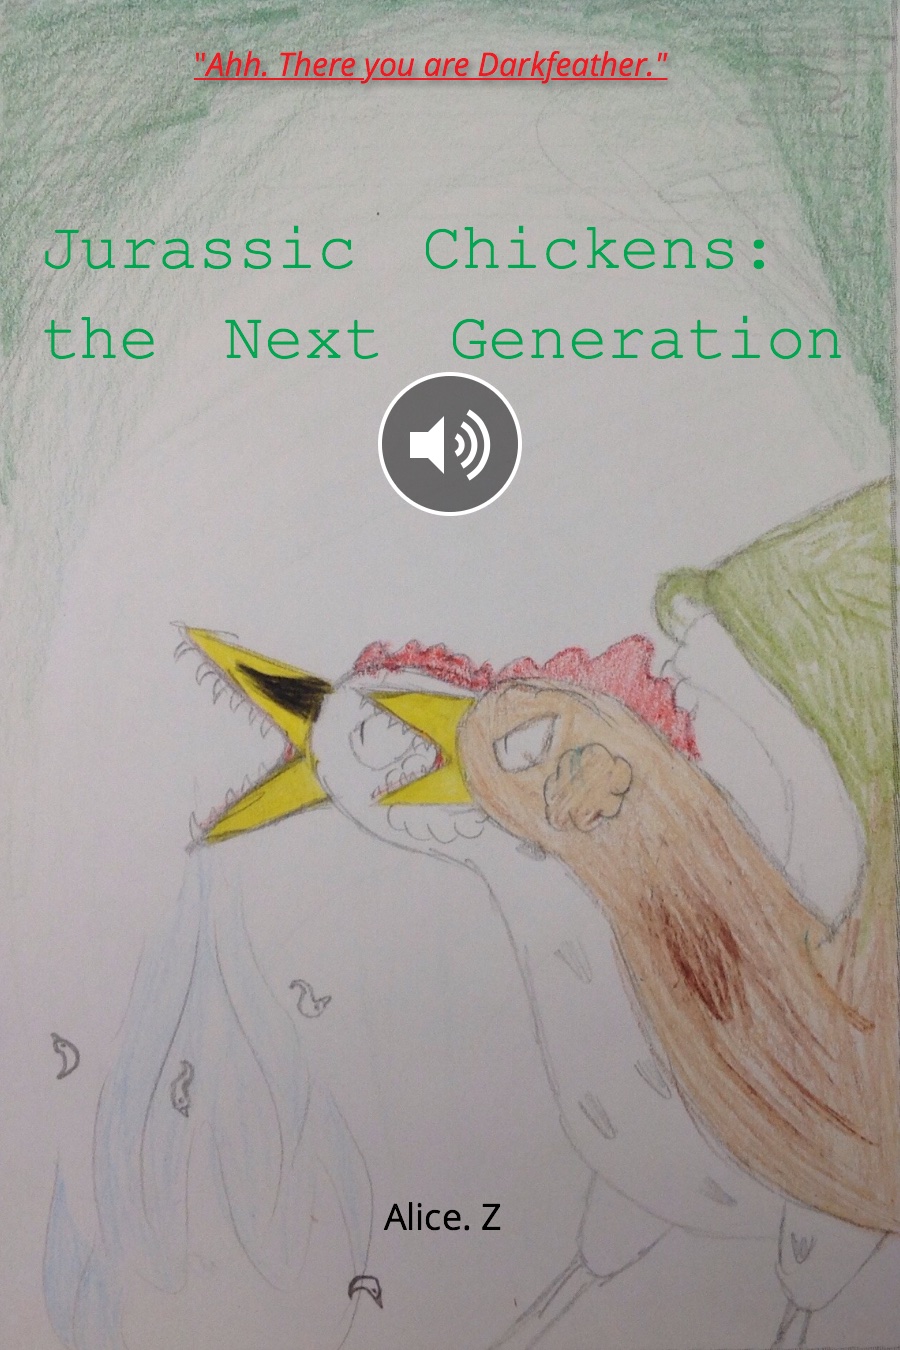 Jurassic Chickens: The Next Generation by Alice Z